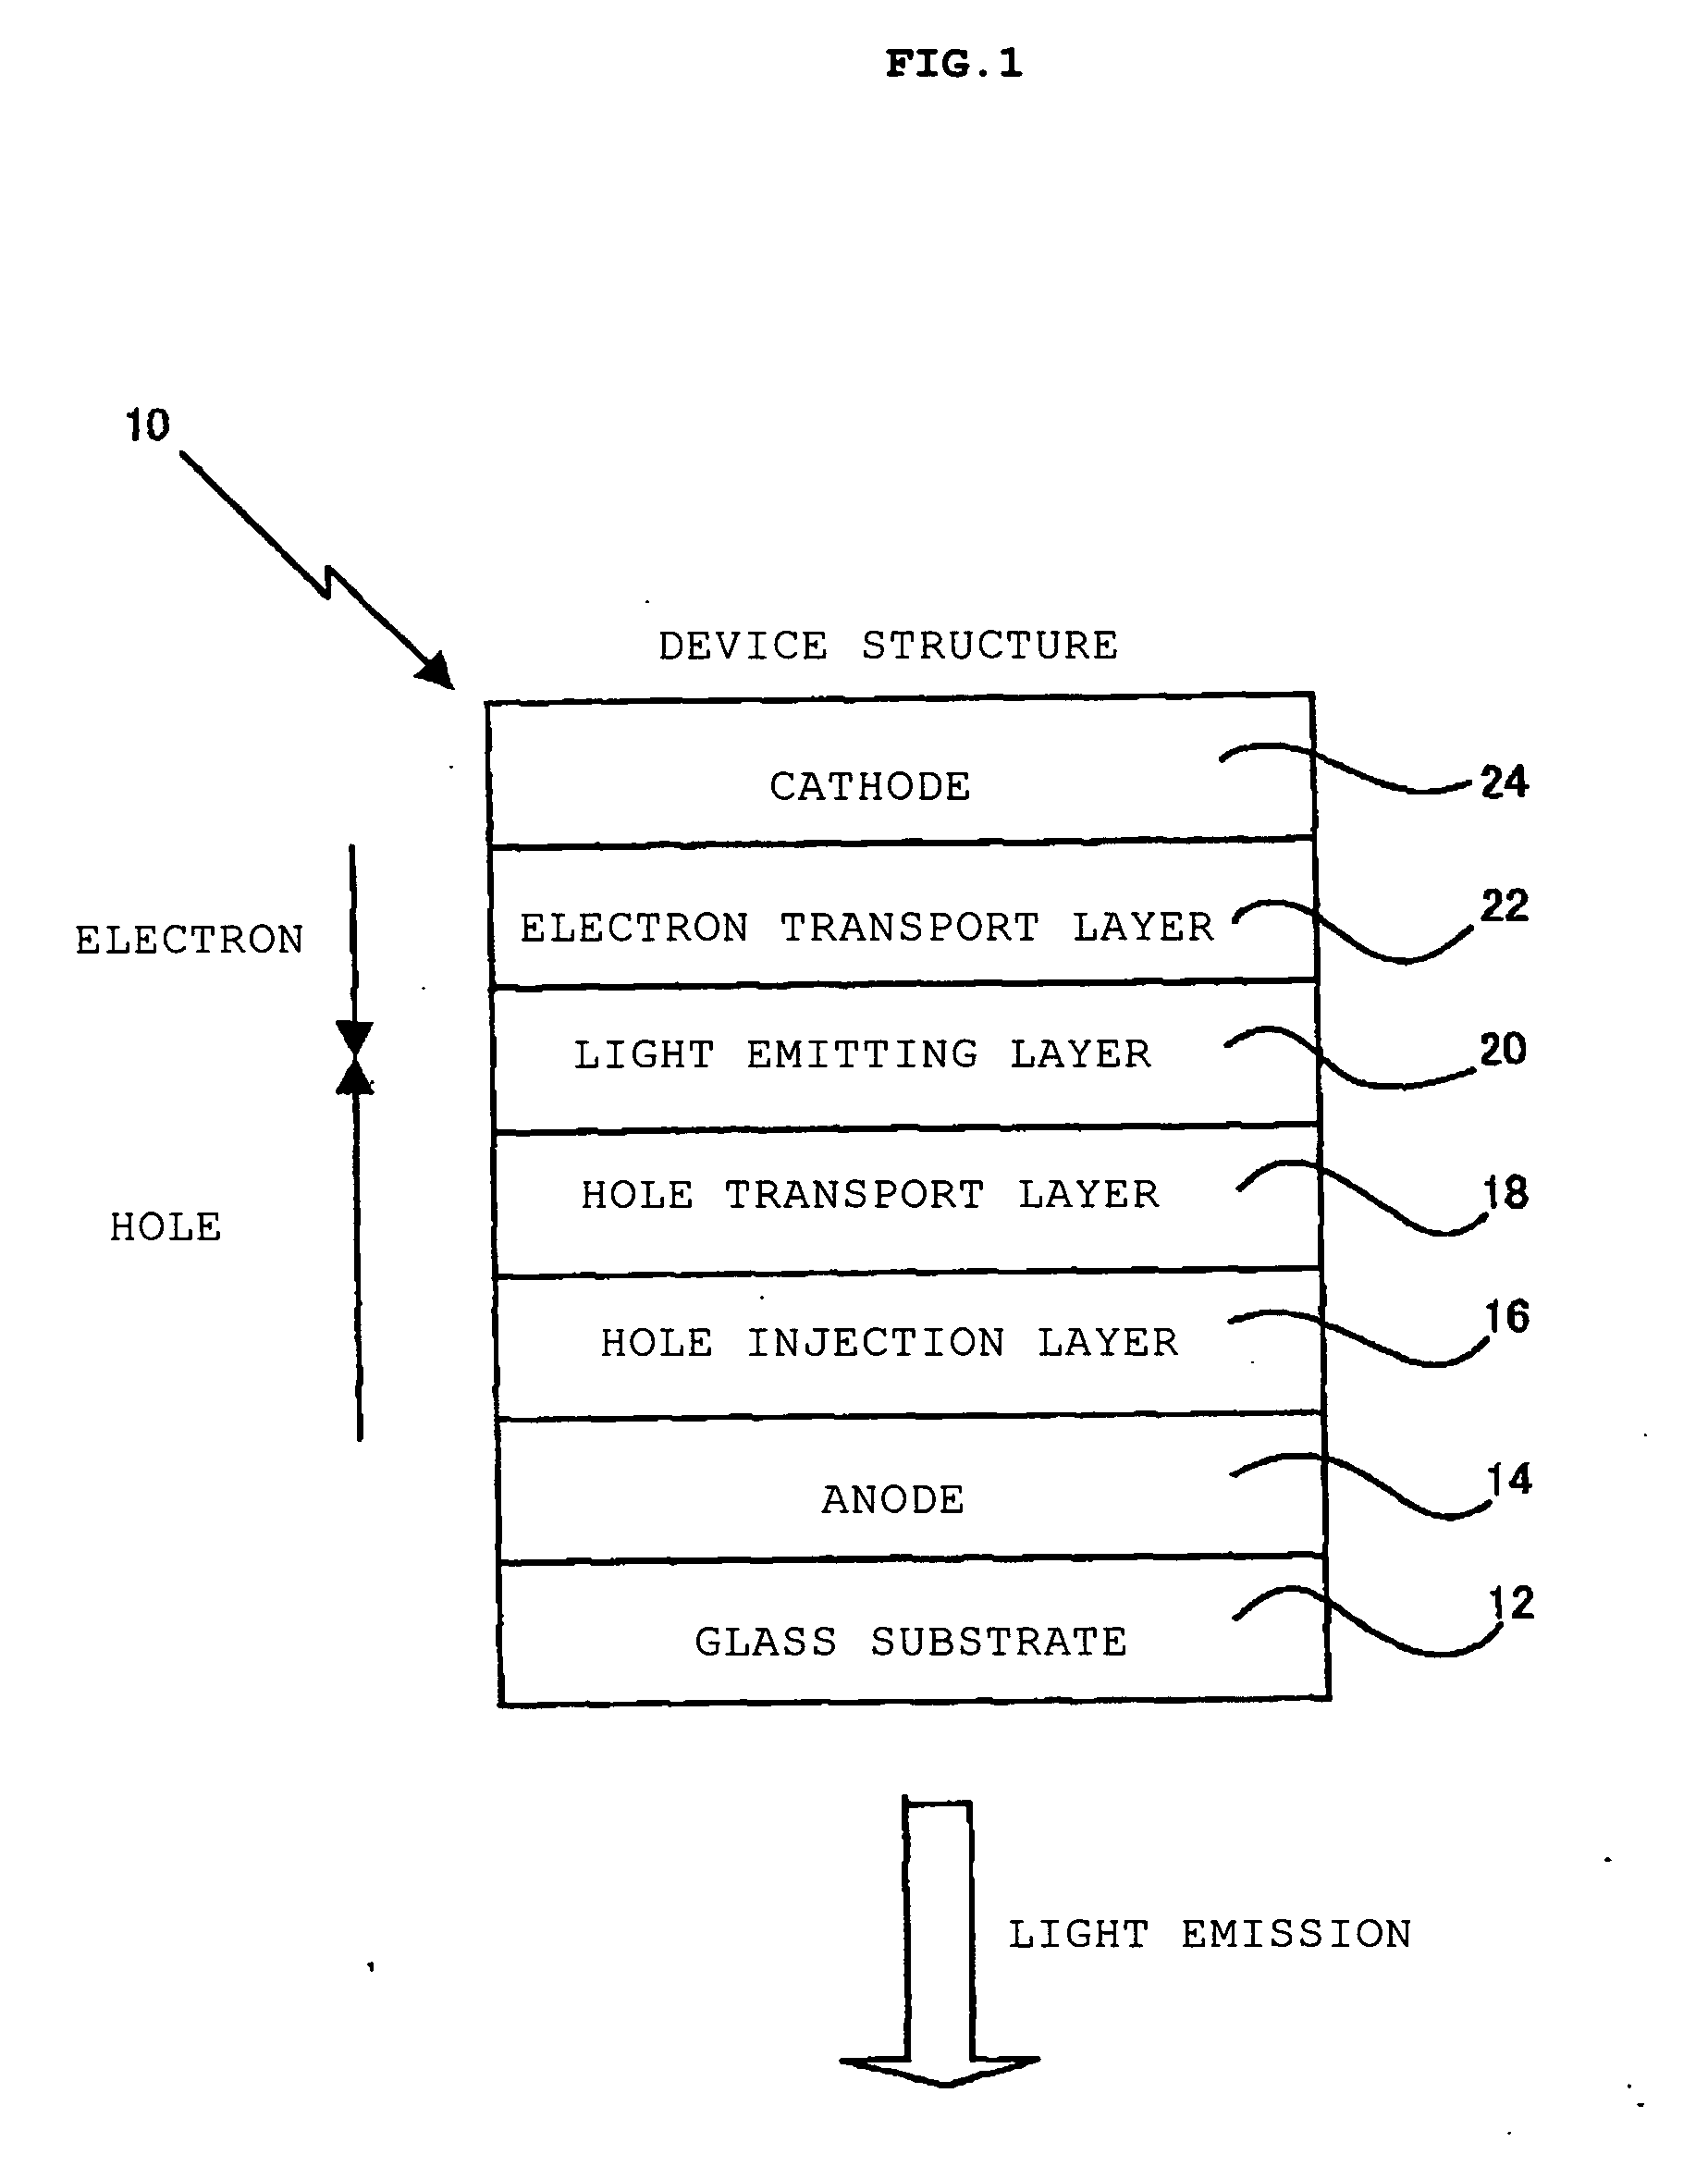 Organic electroluminescence device and method of manufacture